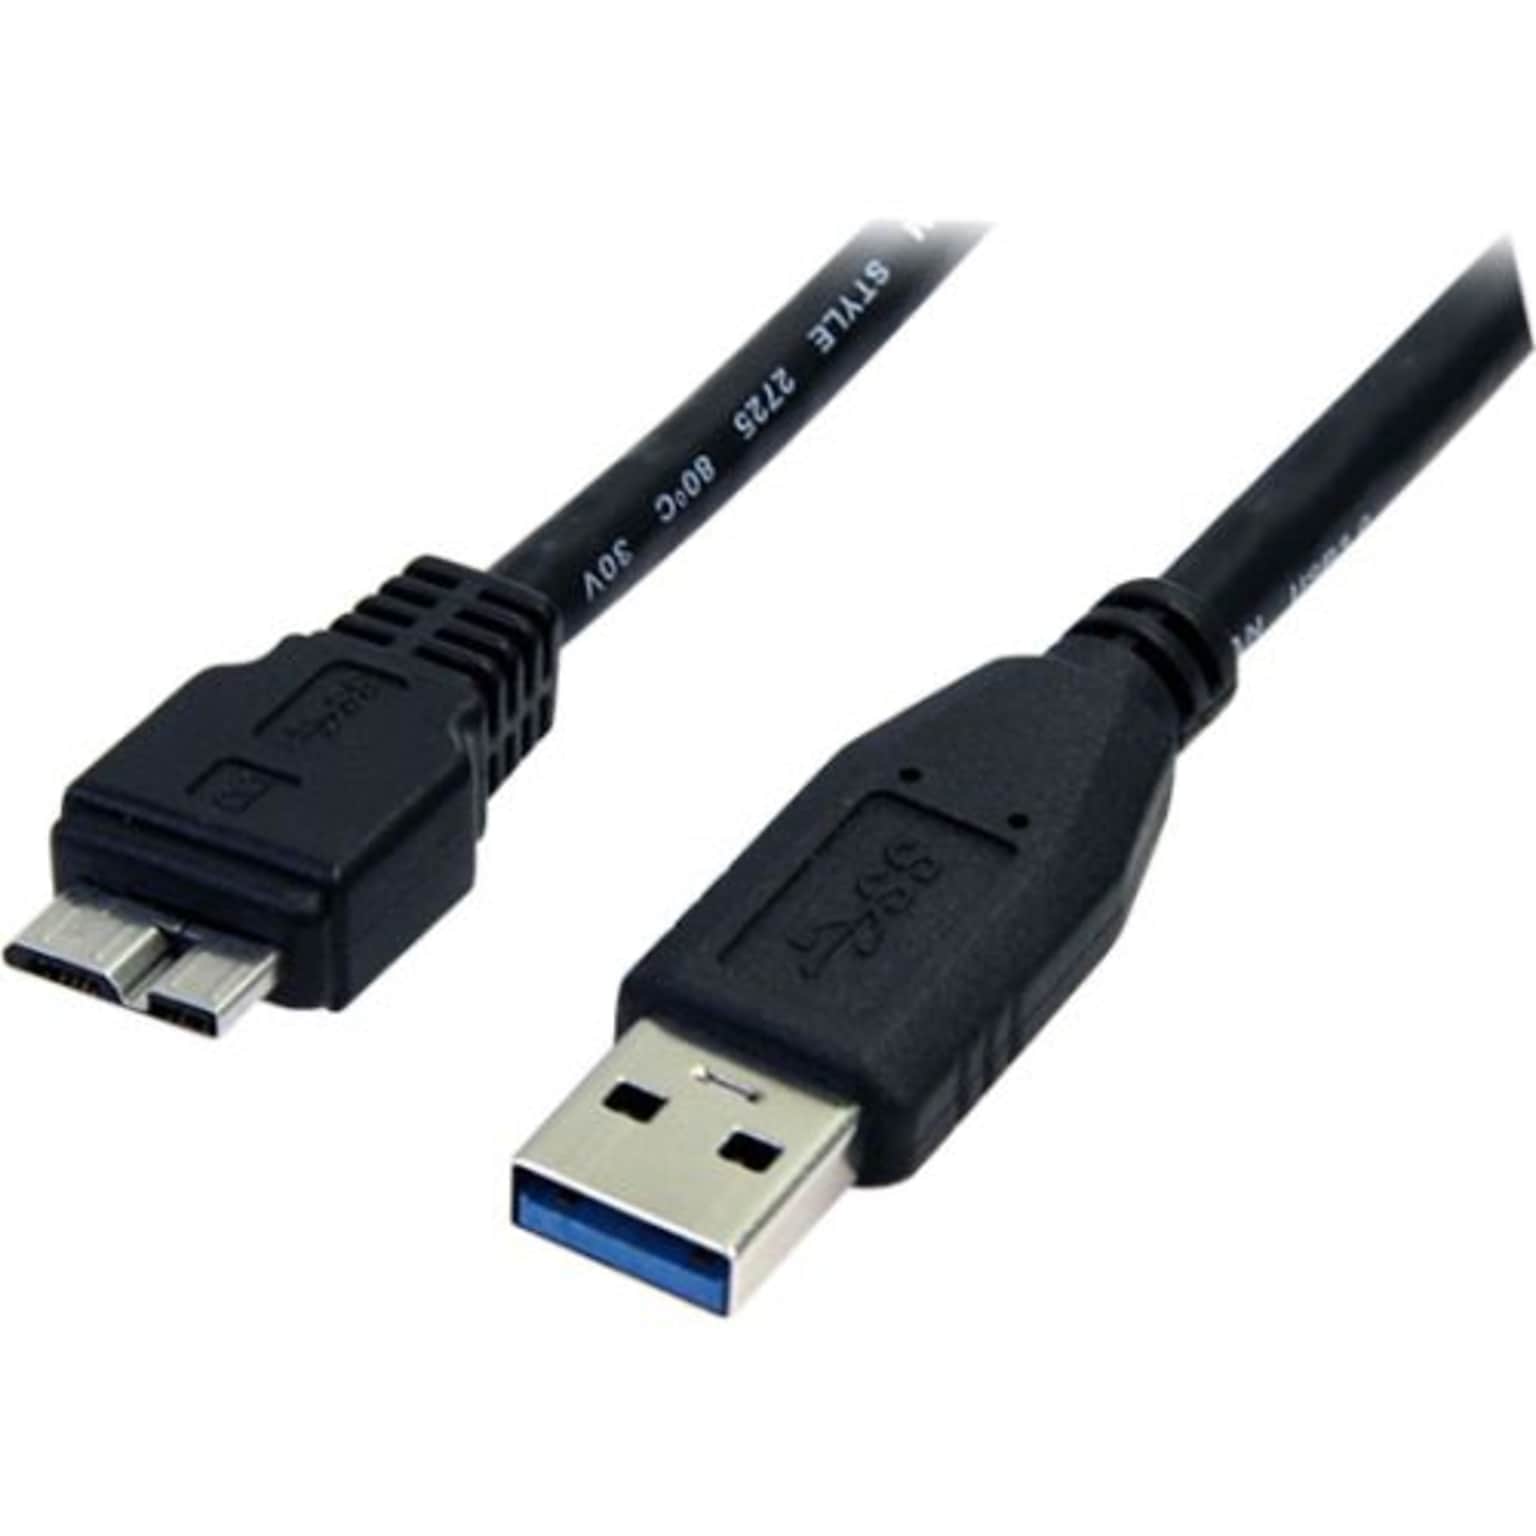 Startech 1.5 SuperSpeed A/B USB Cable; Black